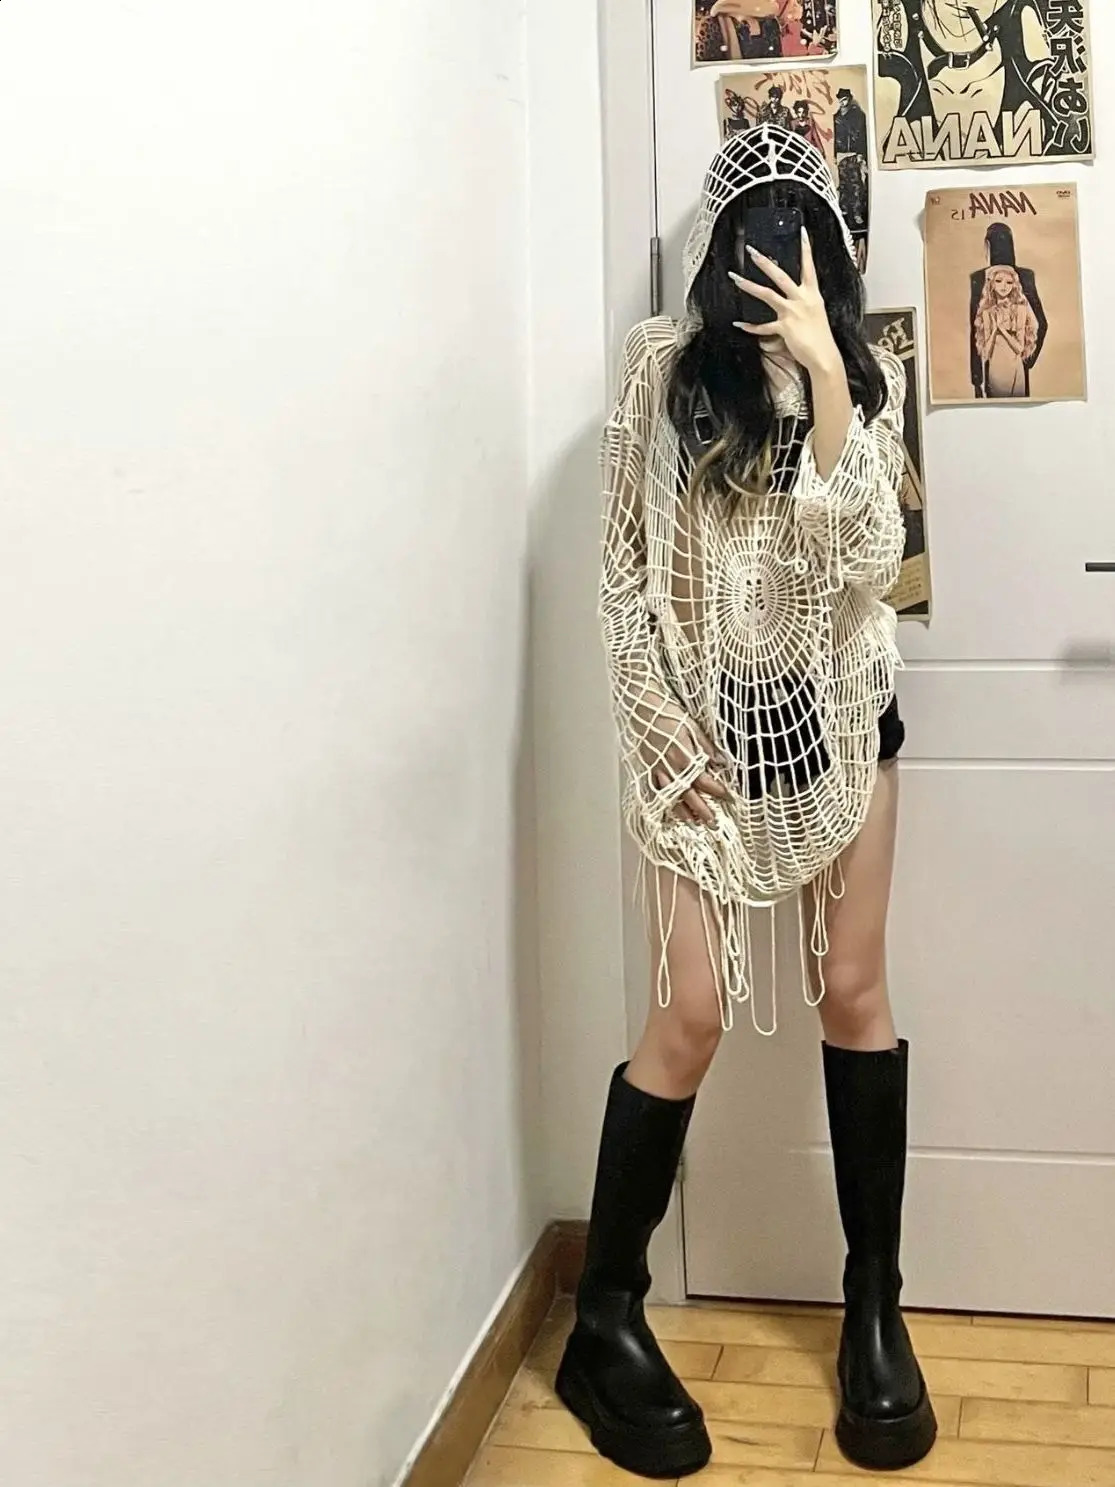 Hollow Knit Hooded Top Y2k Clothes Spider Web Spice Girl Mesh Pullovers Thin Women Korean Fashion Fishing Net Sweaters Gothic 240202